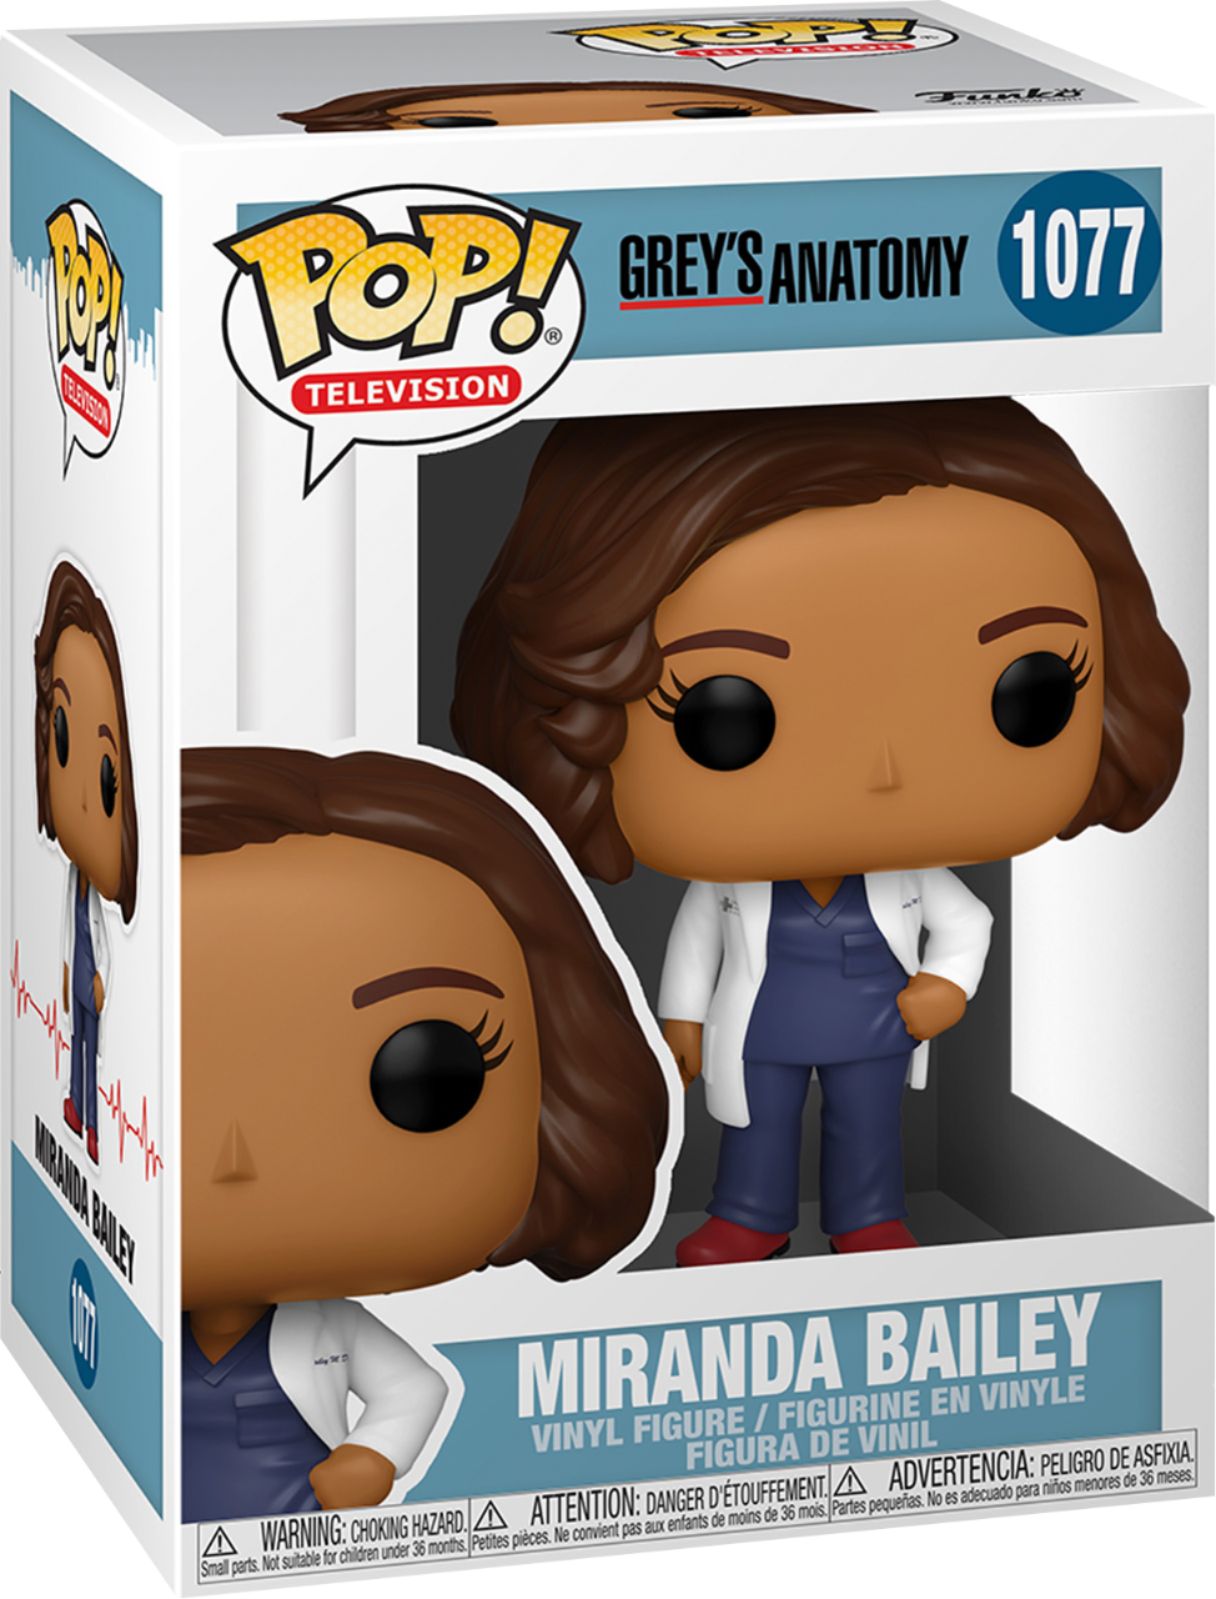 Funko on X: Here's a closer look at our new Grey's Anatomy Pops